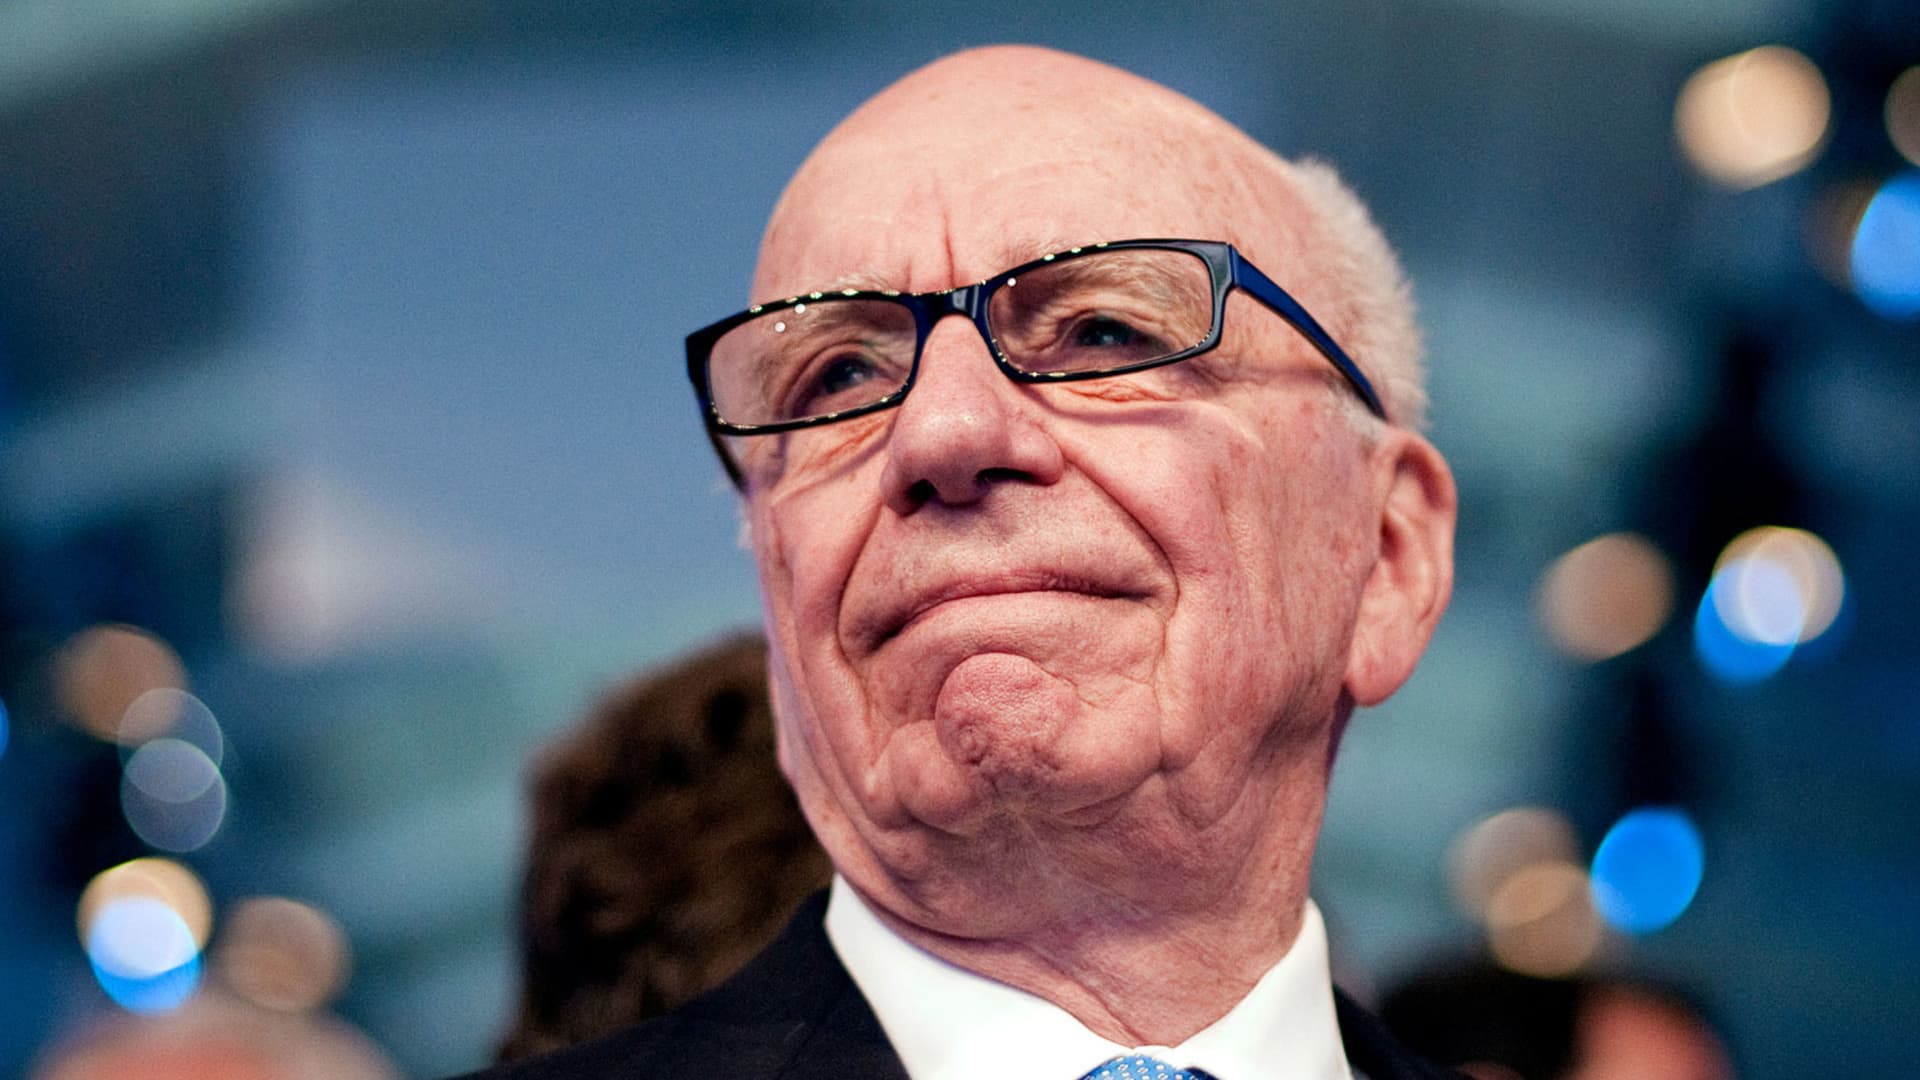 Fox News apologizes to judge in defamation case for failing to disclose Rupert Murdoch’s role at the network